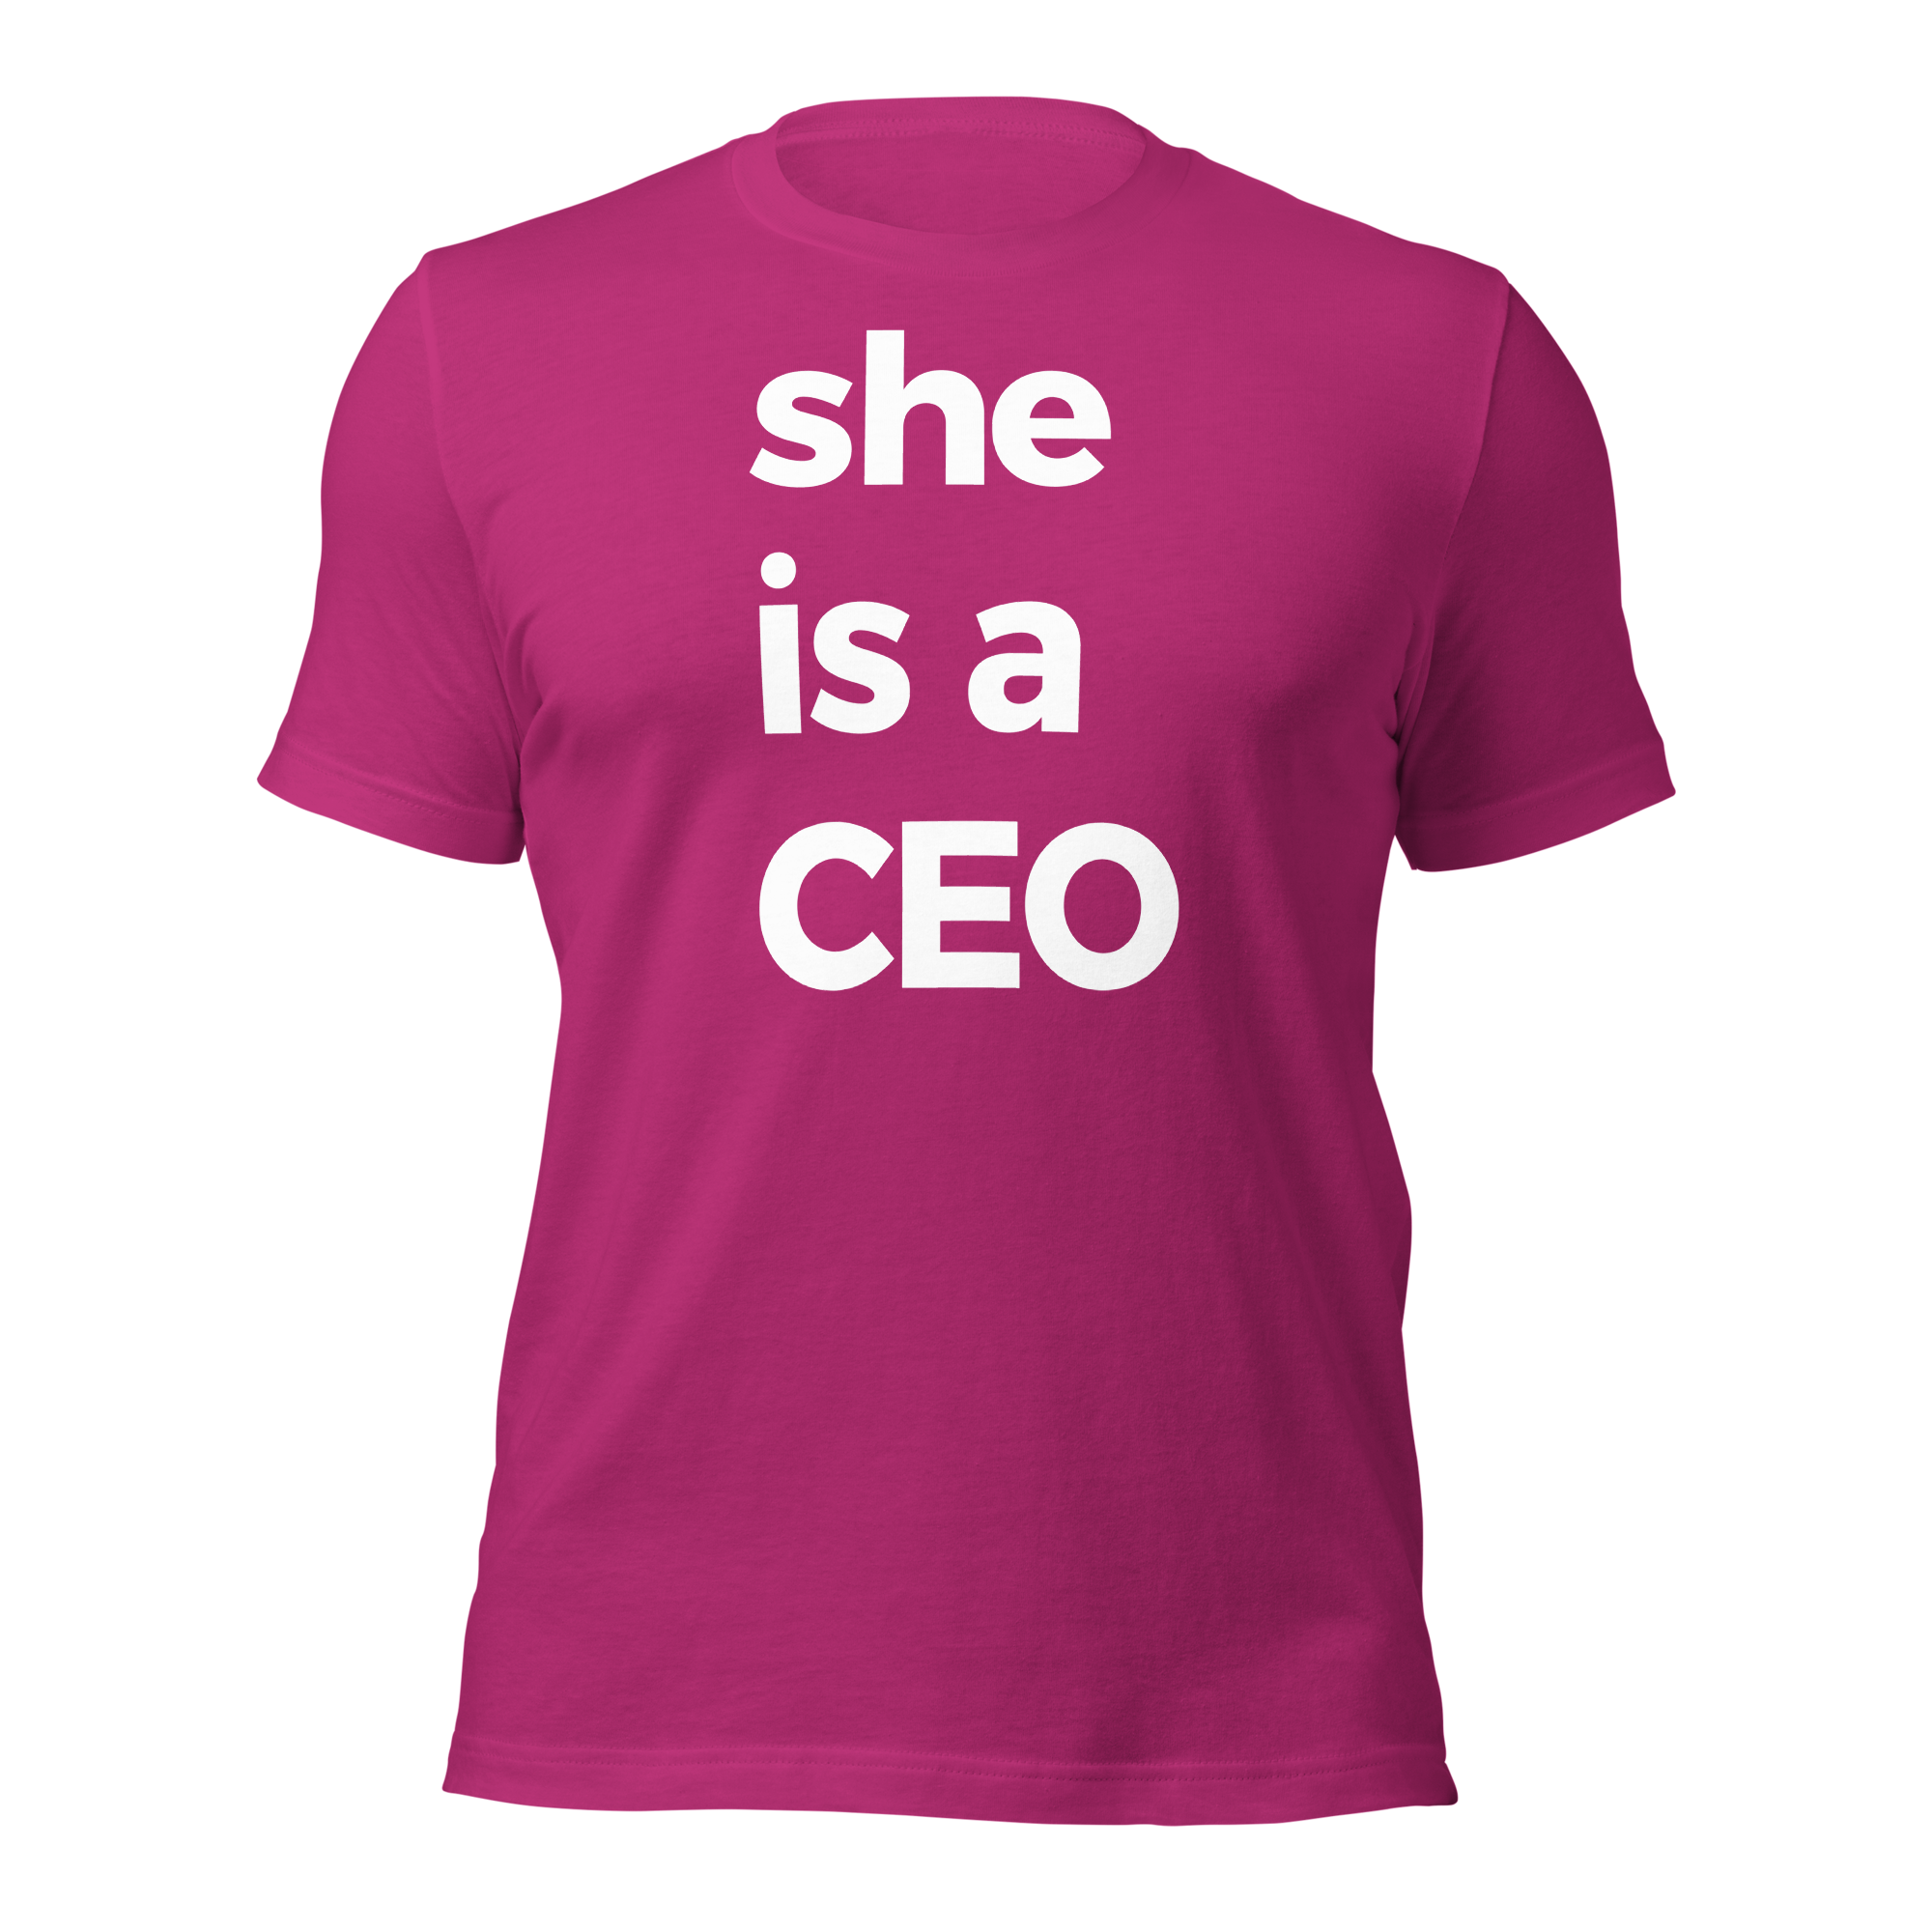 she is a ceo tee